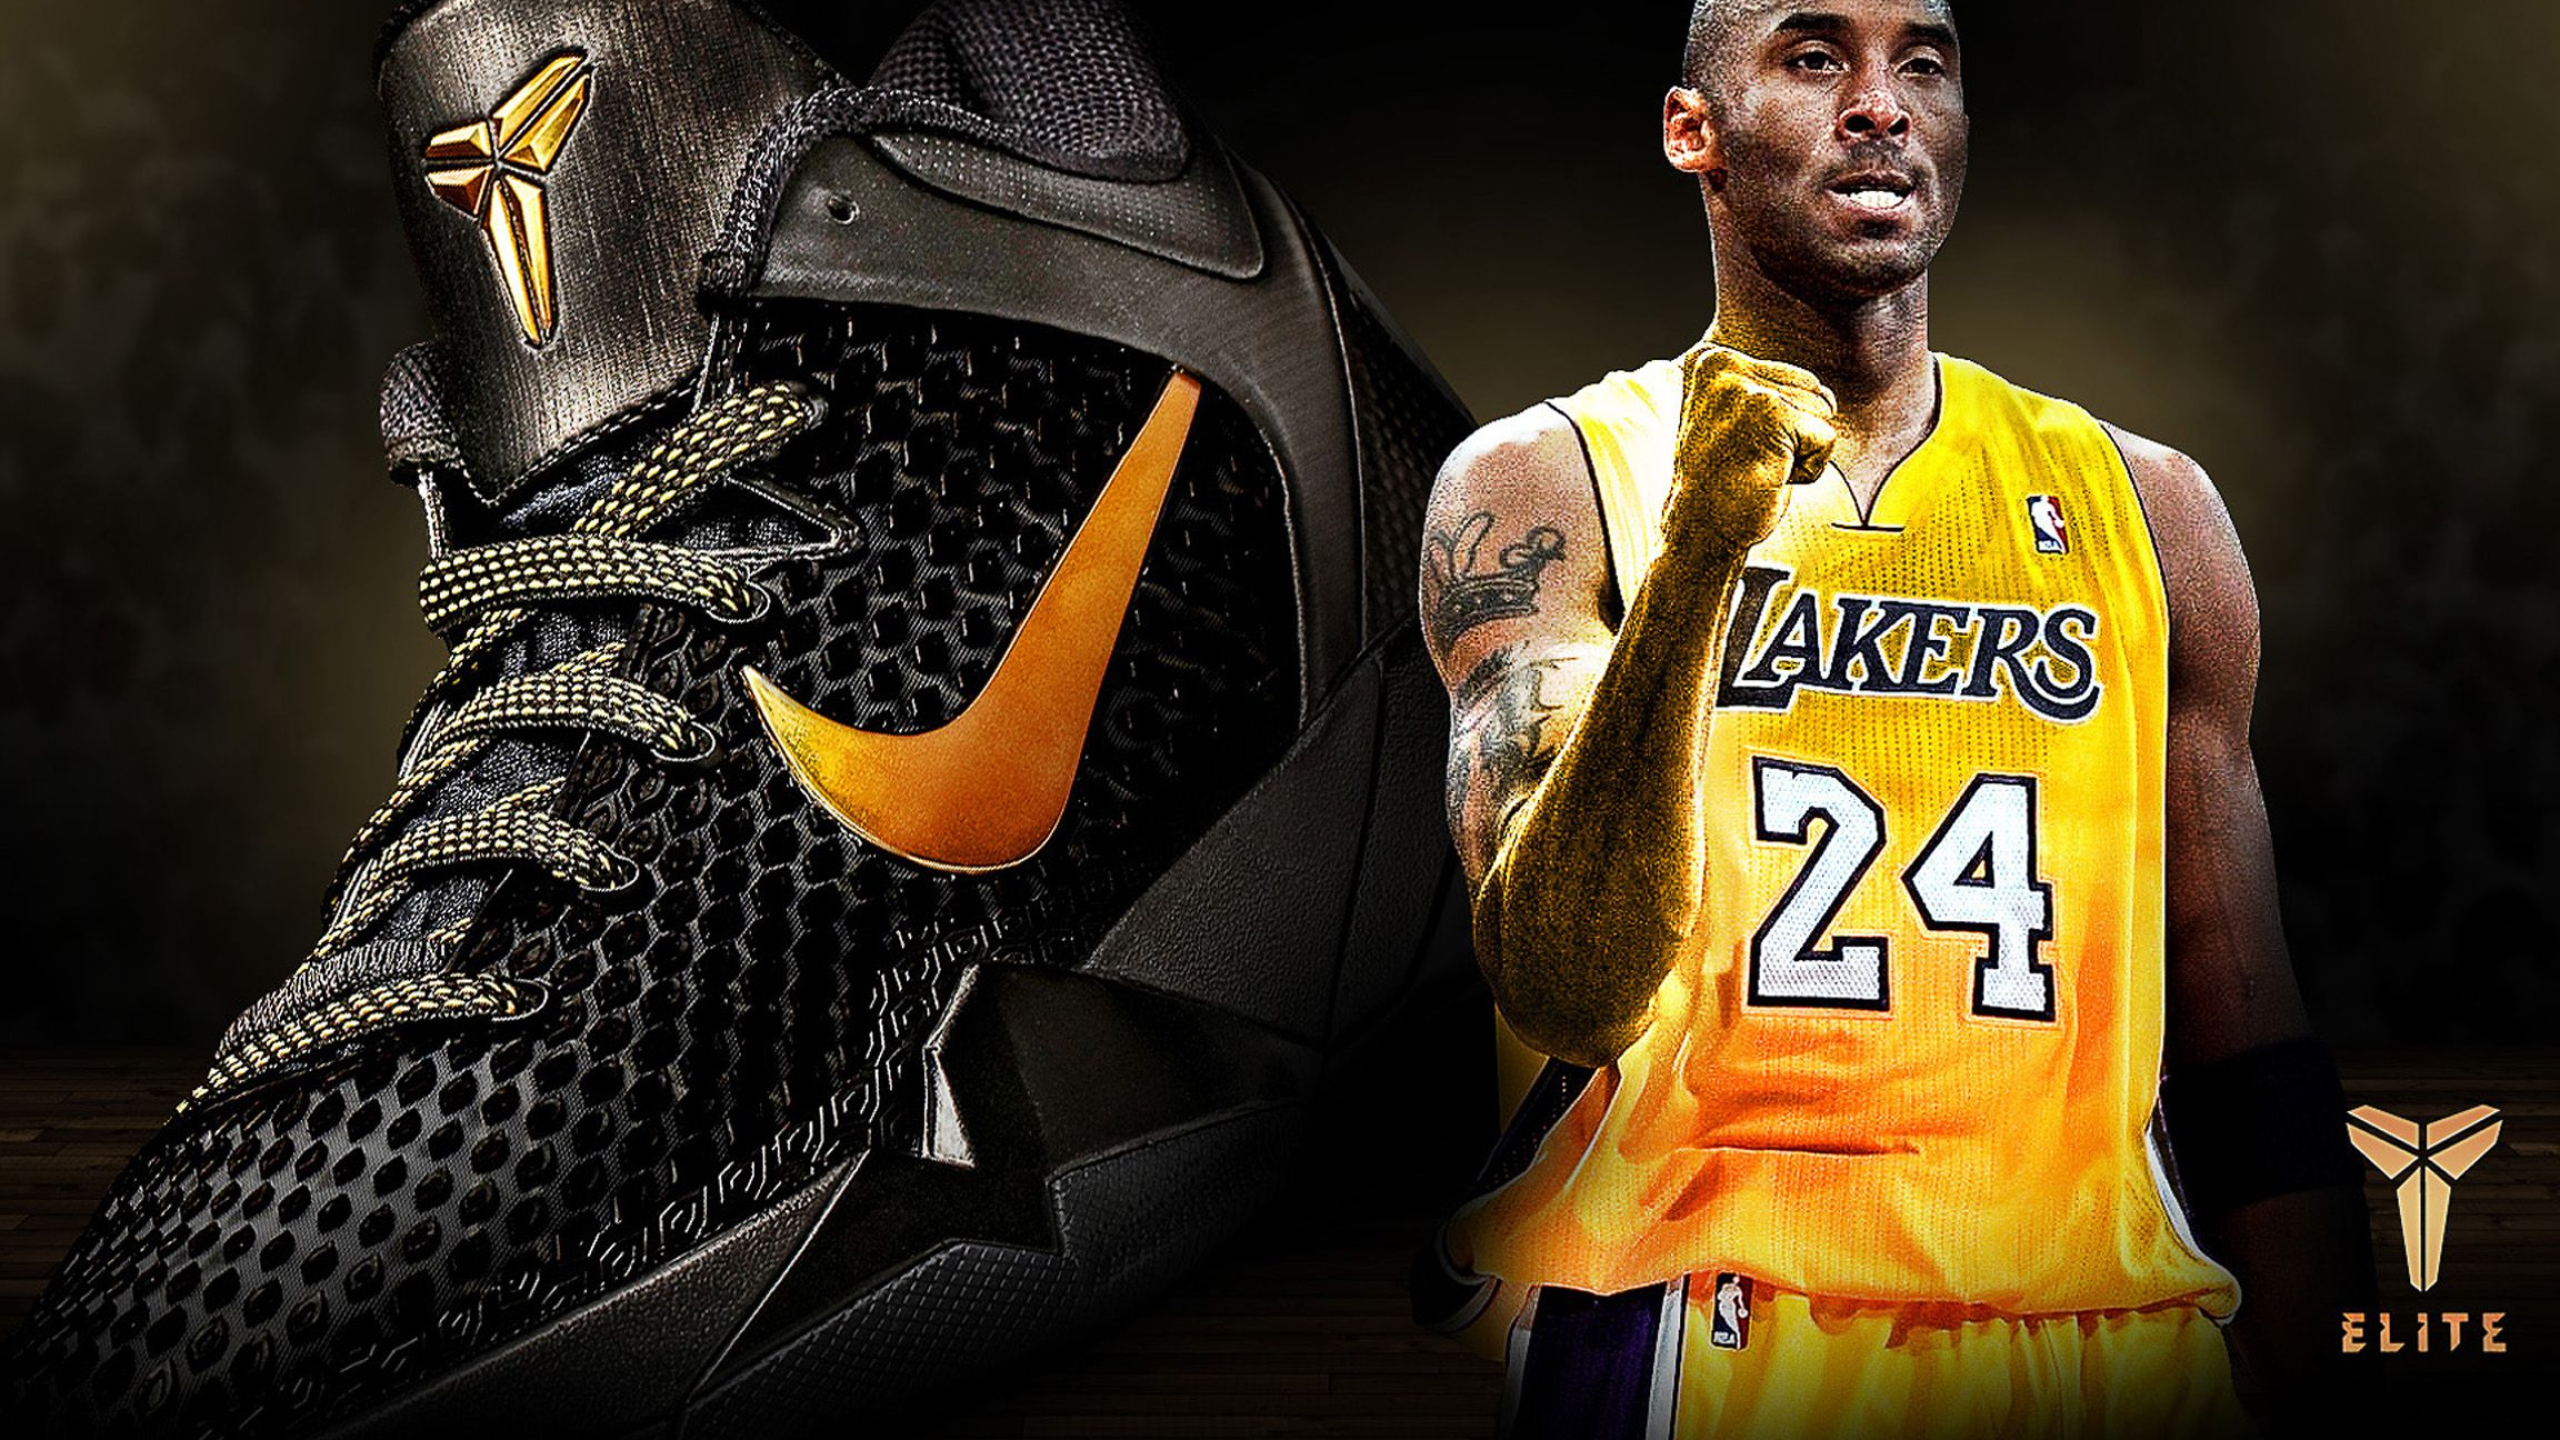 2560x1440 Nike Basketball Shoes Wallpapers Top Free Nike Basketball Shoes Backgrounds